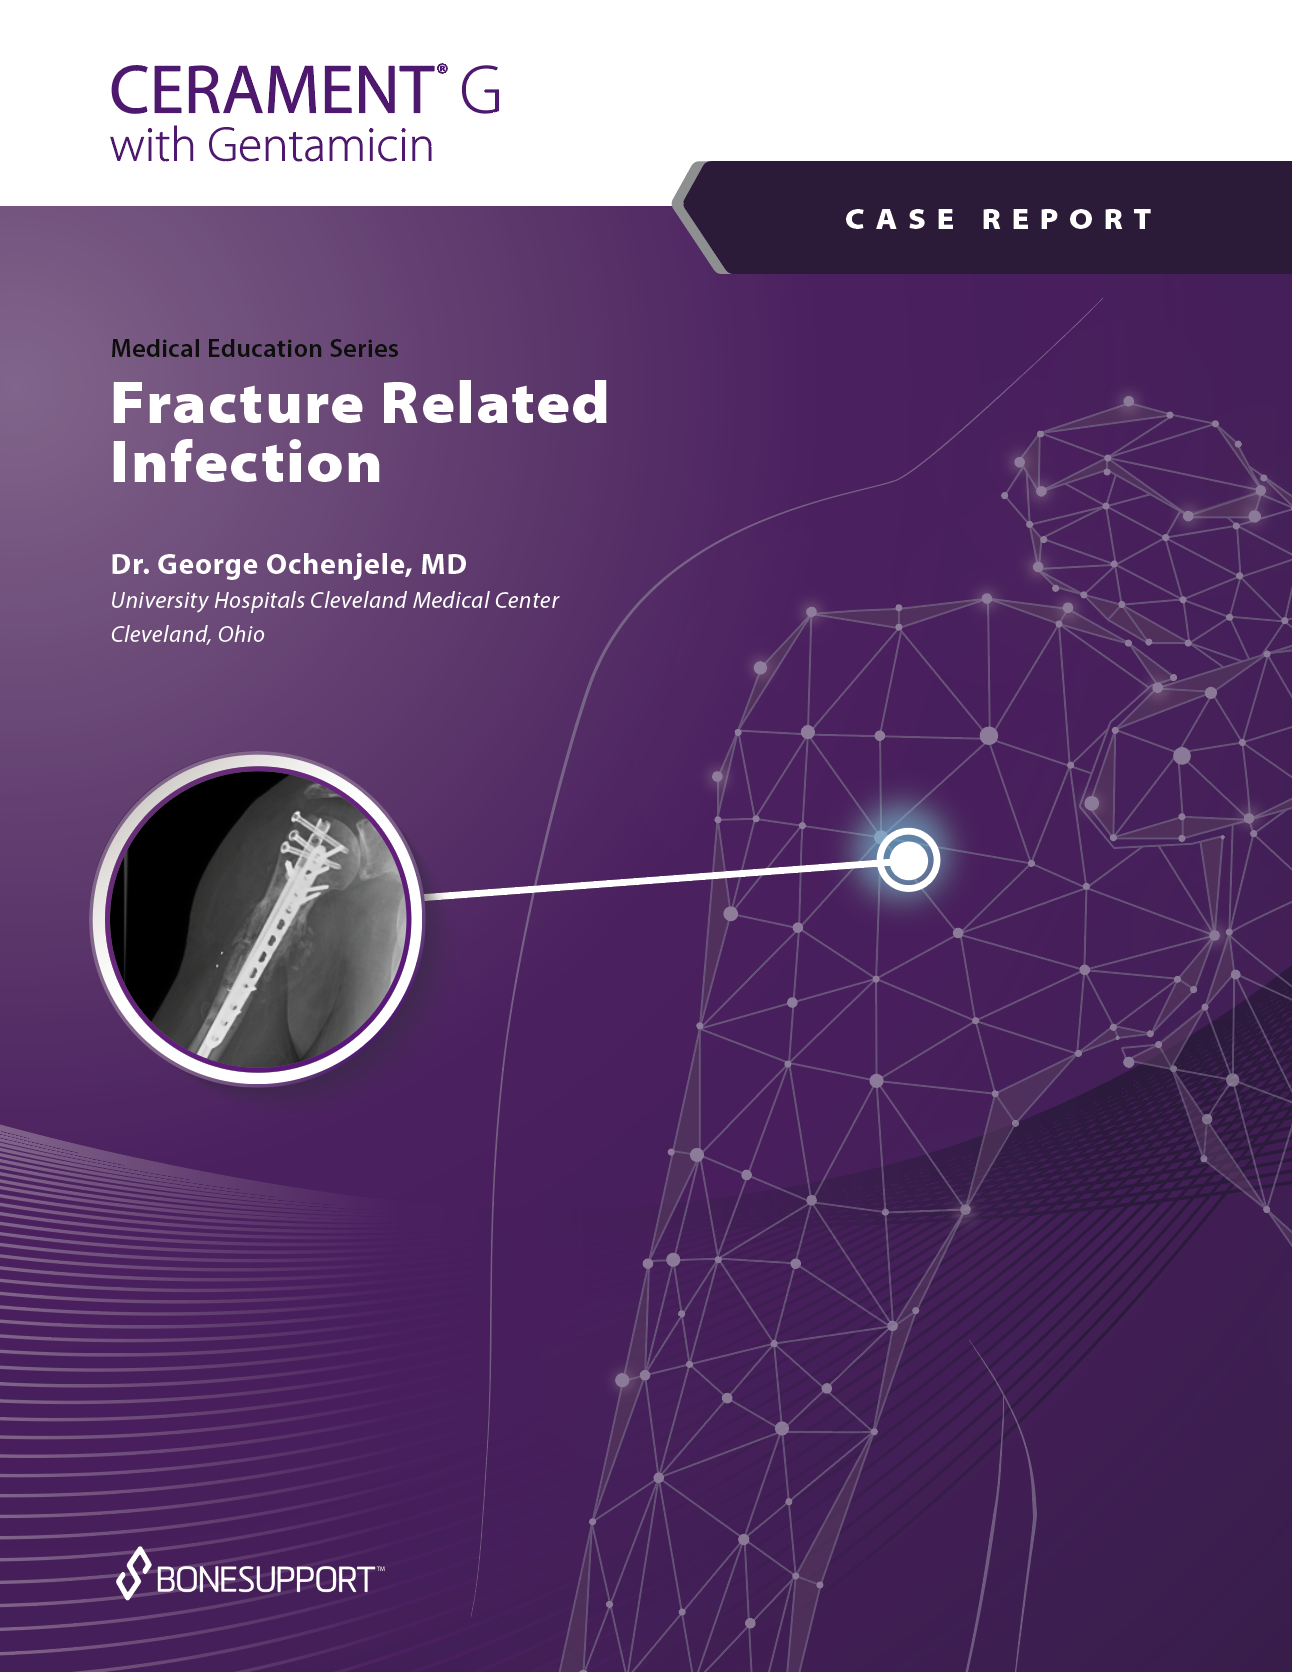 Fracture Related Infection